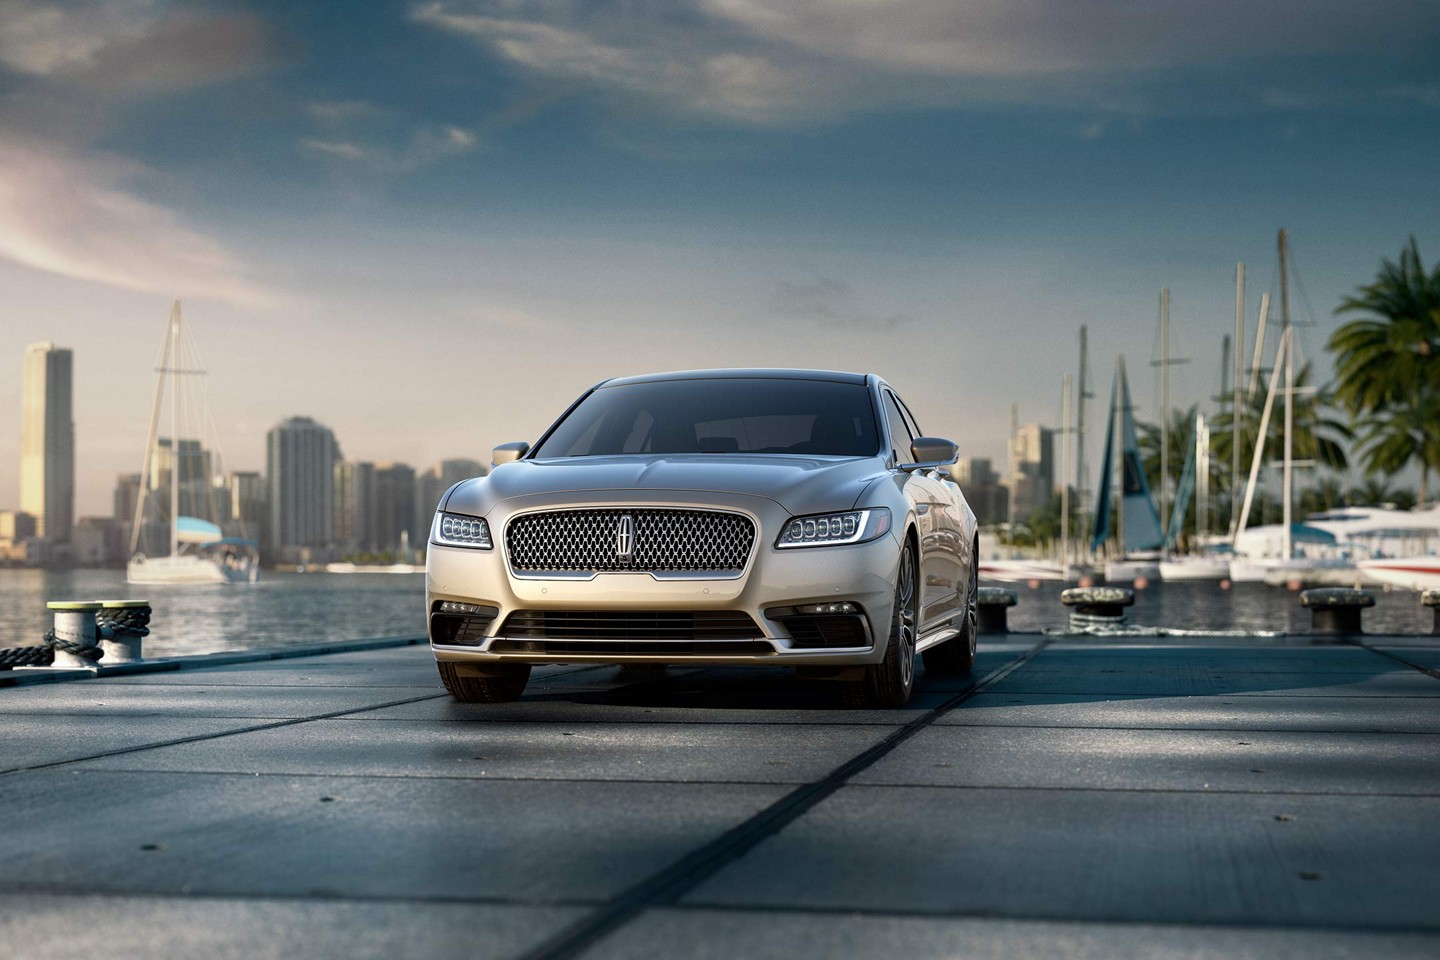 Exterior of the 2018 Lincoln Continental